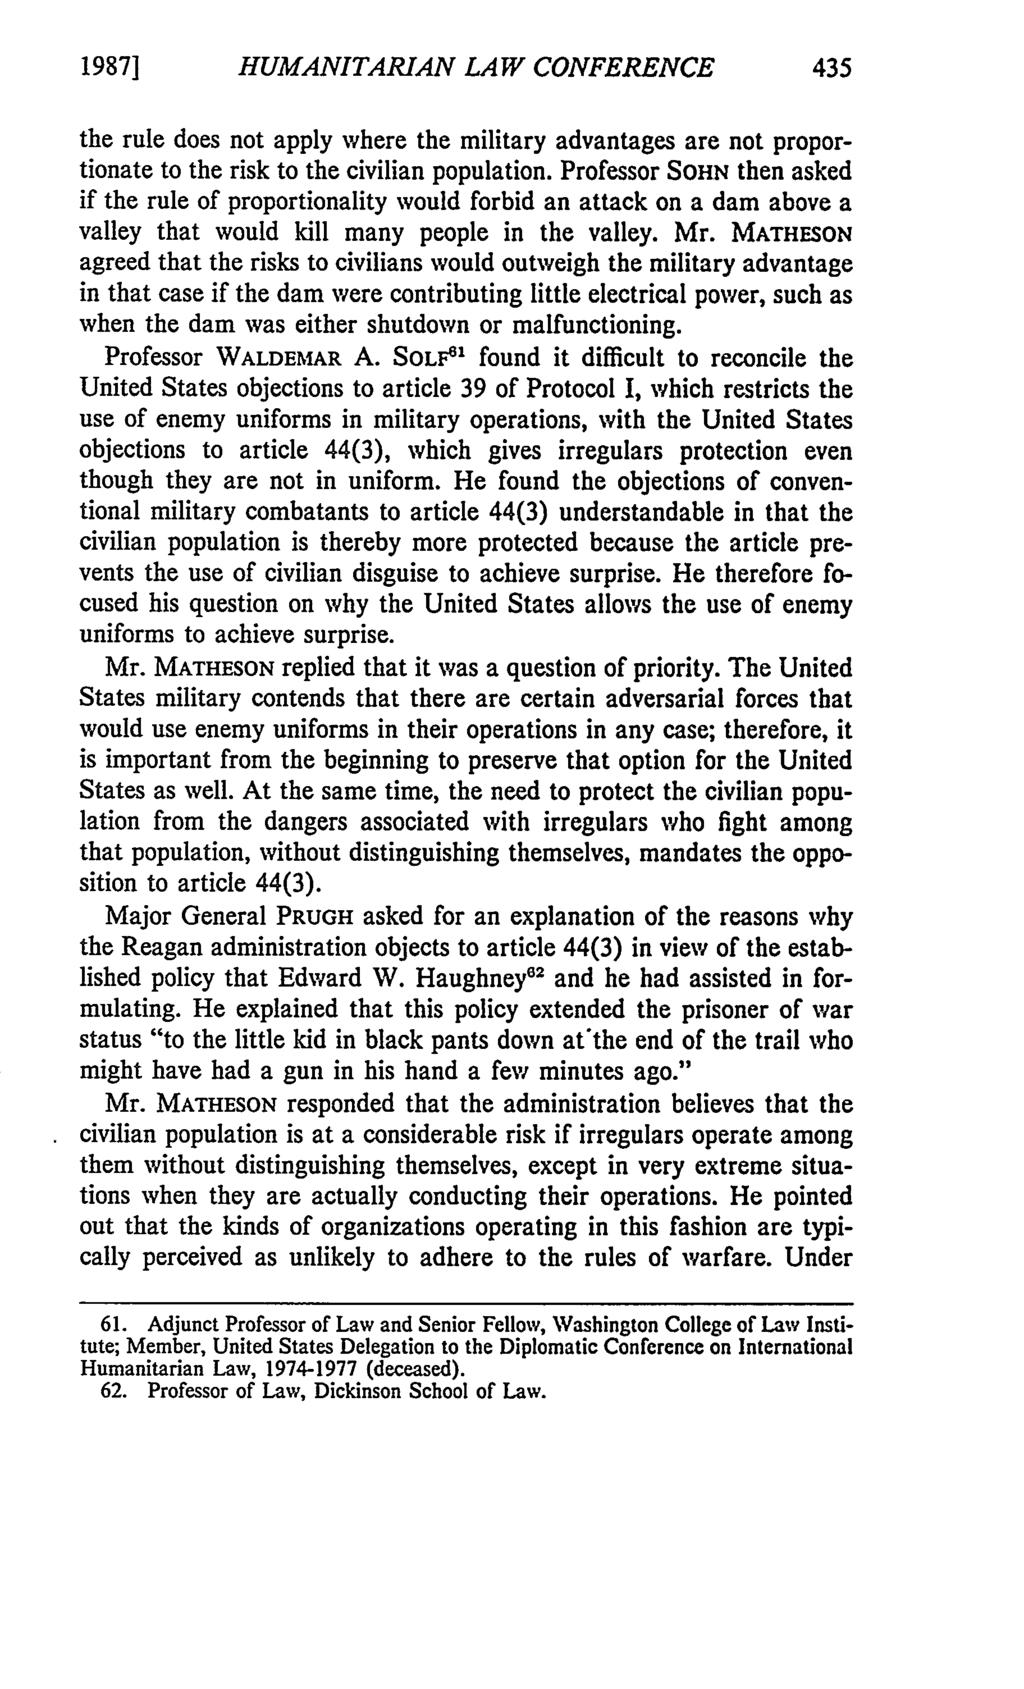 1987] HUMANITARIAN LAW CONFERENCE the rule does not apply where the military advantages are not proportionate to the risk to the civilian population.